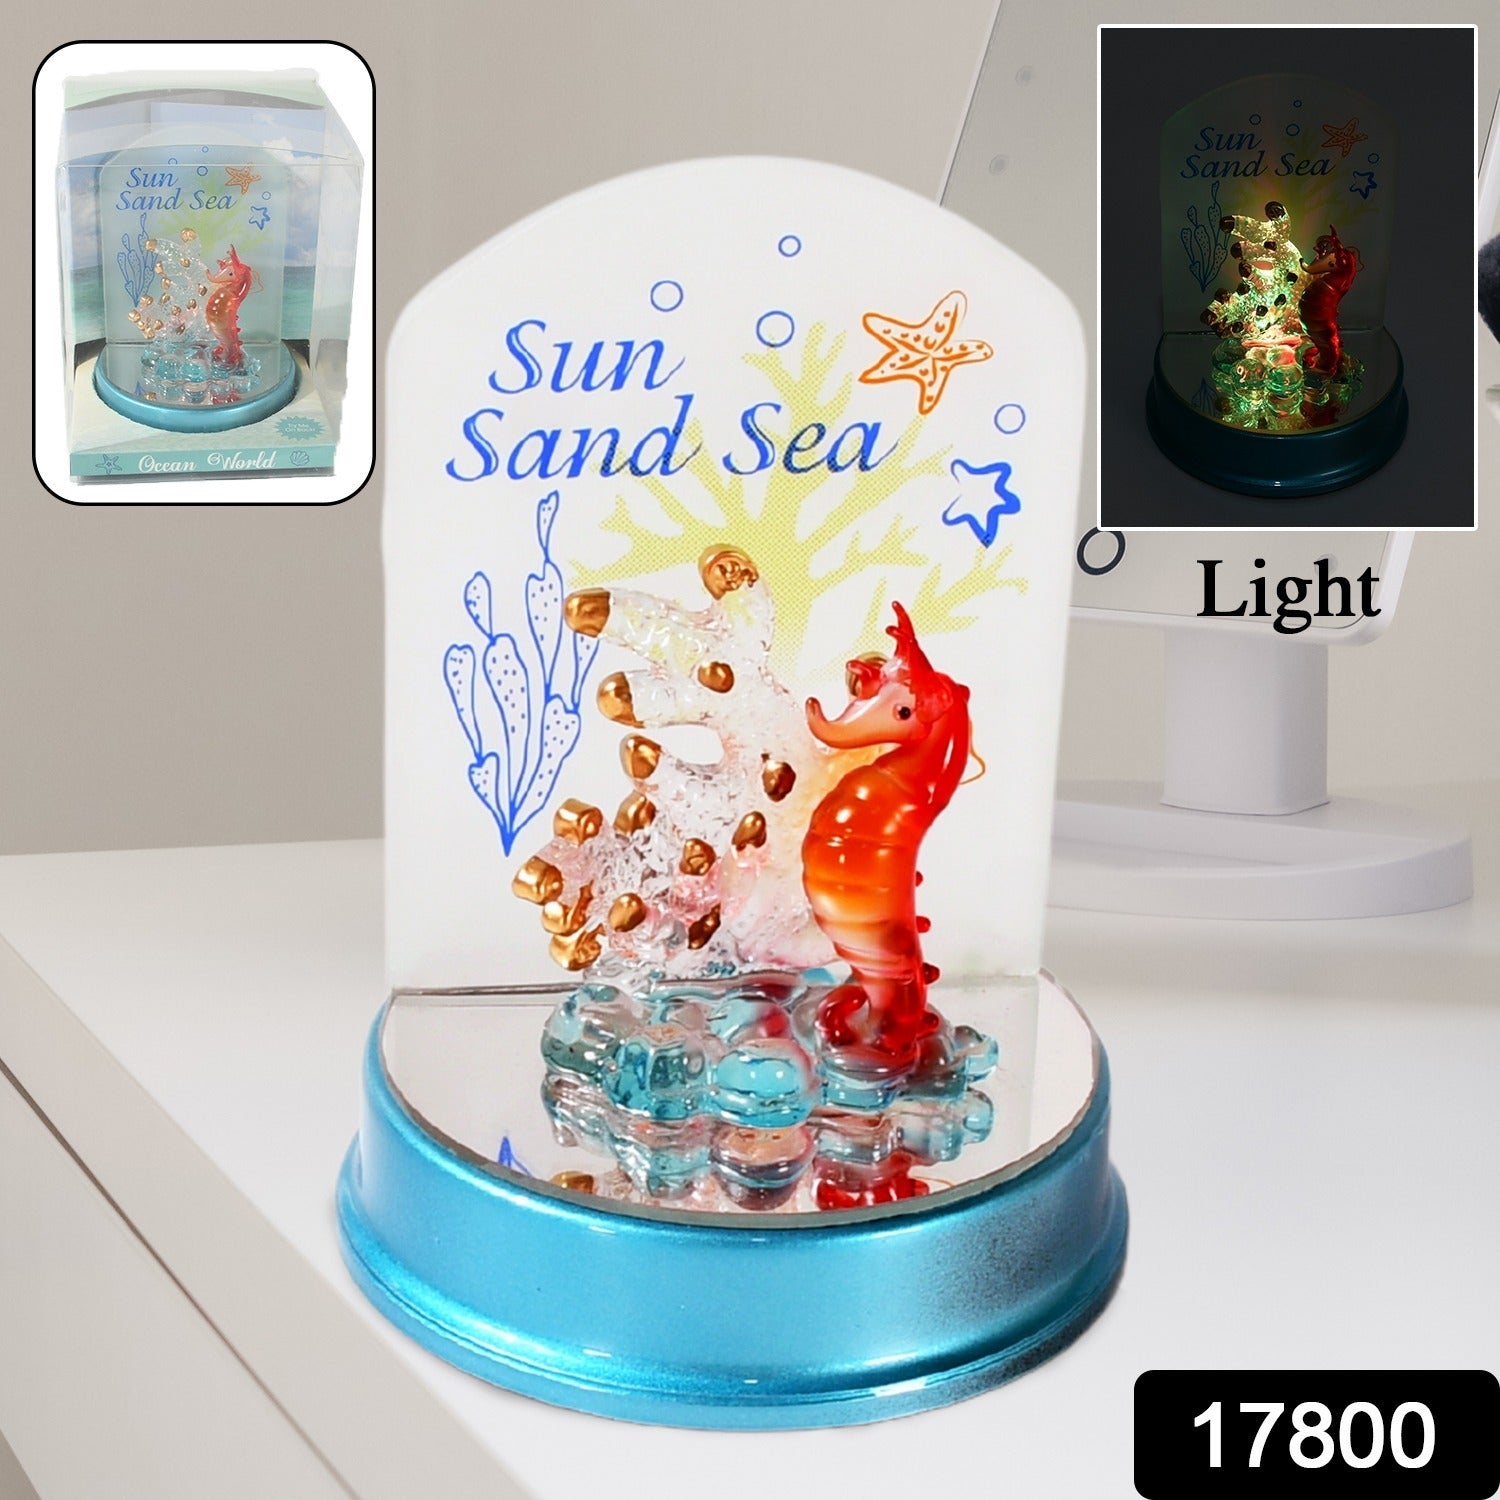 17800 Cute Cartoon Lovely Gift Night Light, Multi-Color Light, Showpiece Valentine's Day Gift, Cute Anniversary, Wedding, Birthday, Unique Gift, Home Decoration Gift, Battery Operated (3 Battery Included)